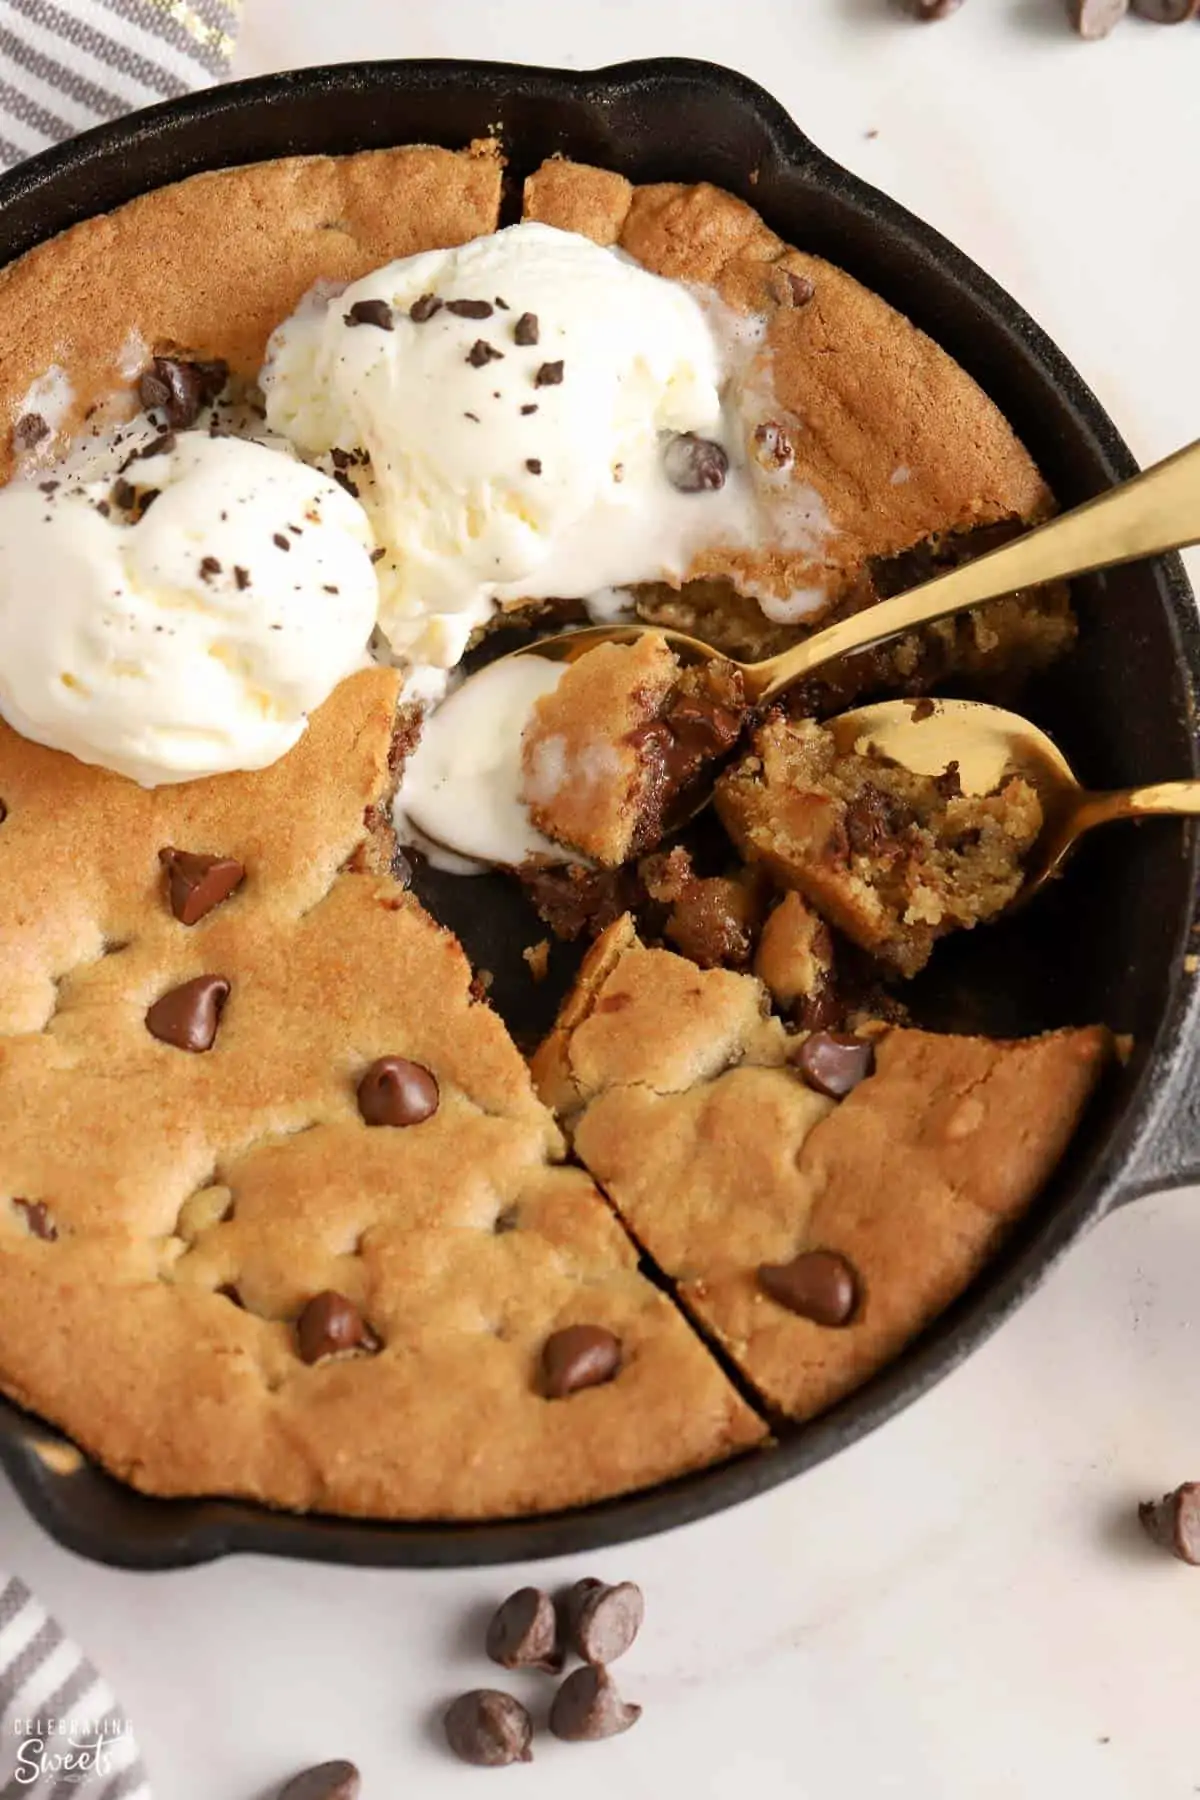 Chocolate chip skillet cookie in a cast iron skillet with vanilla ice cream and two gold spoons.